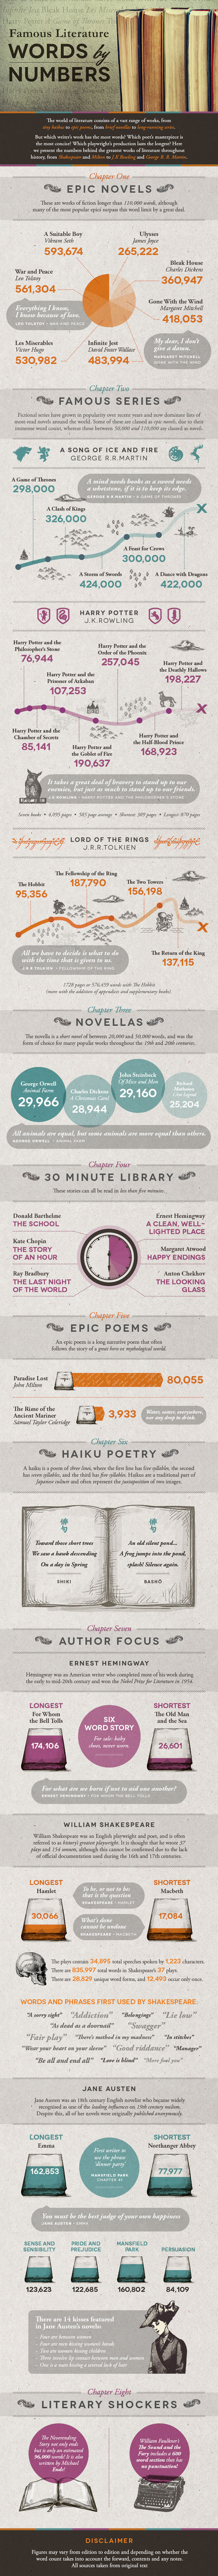 word count infographic